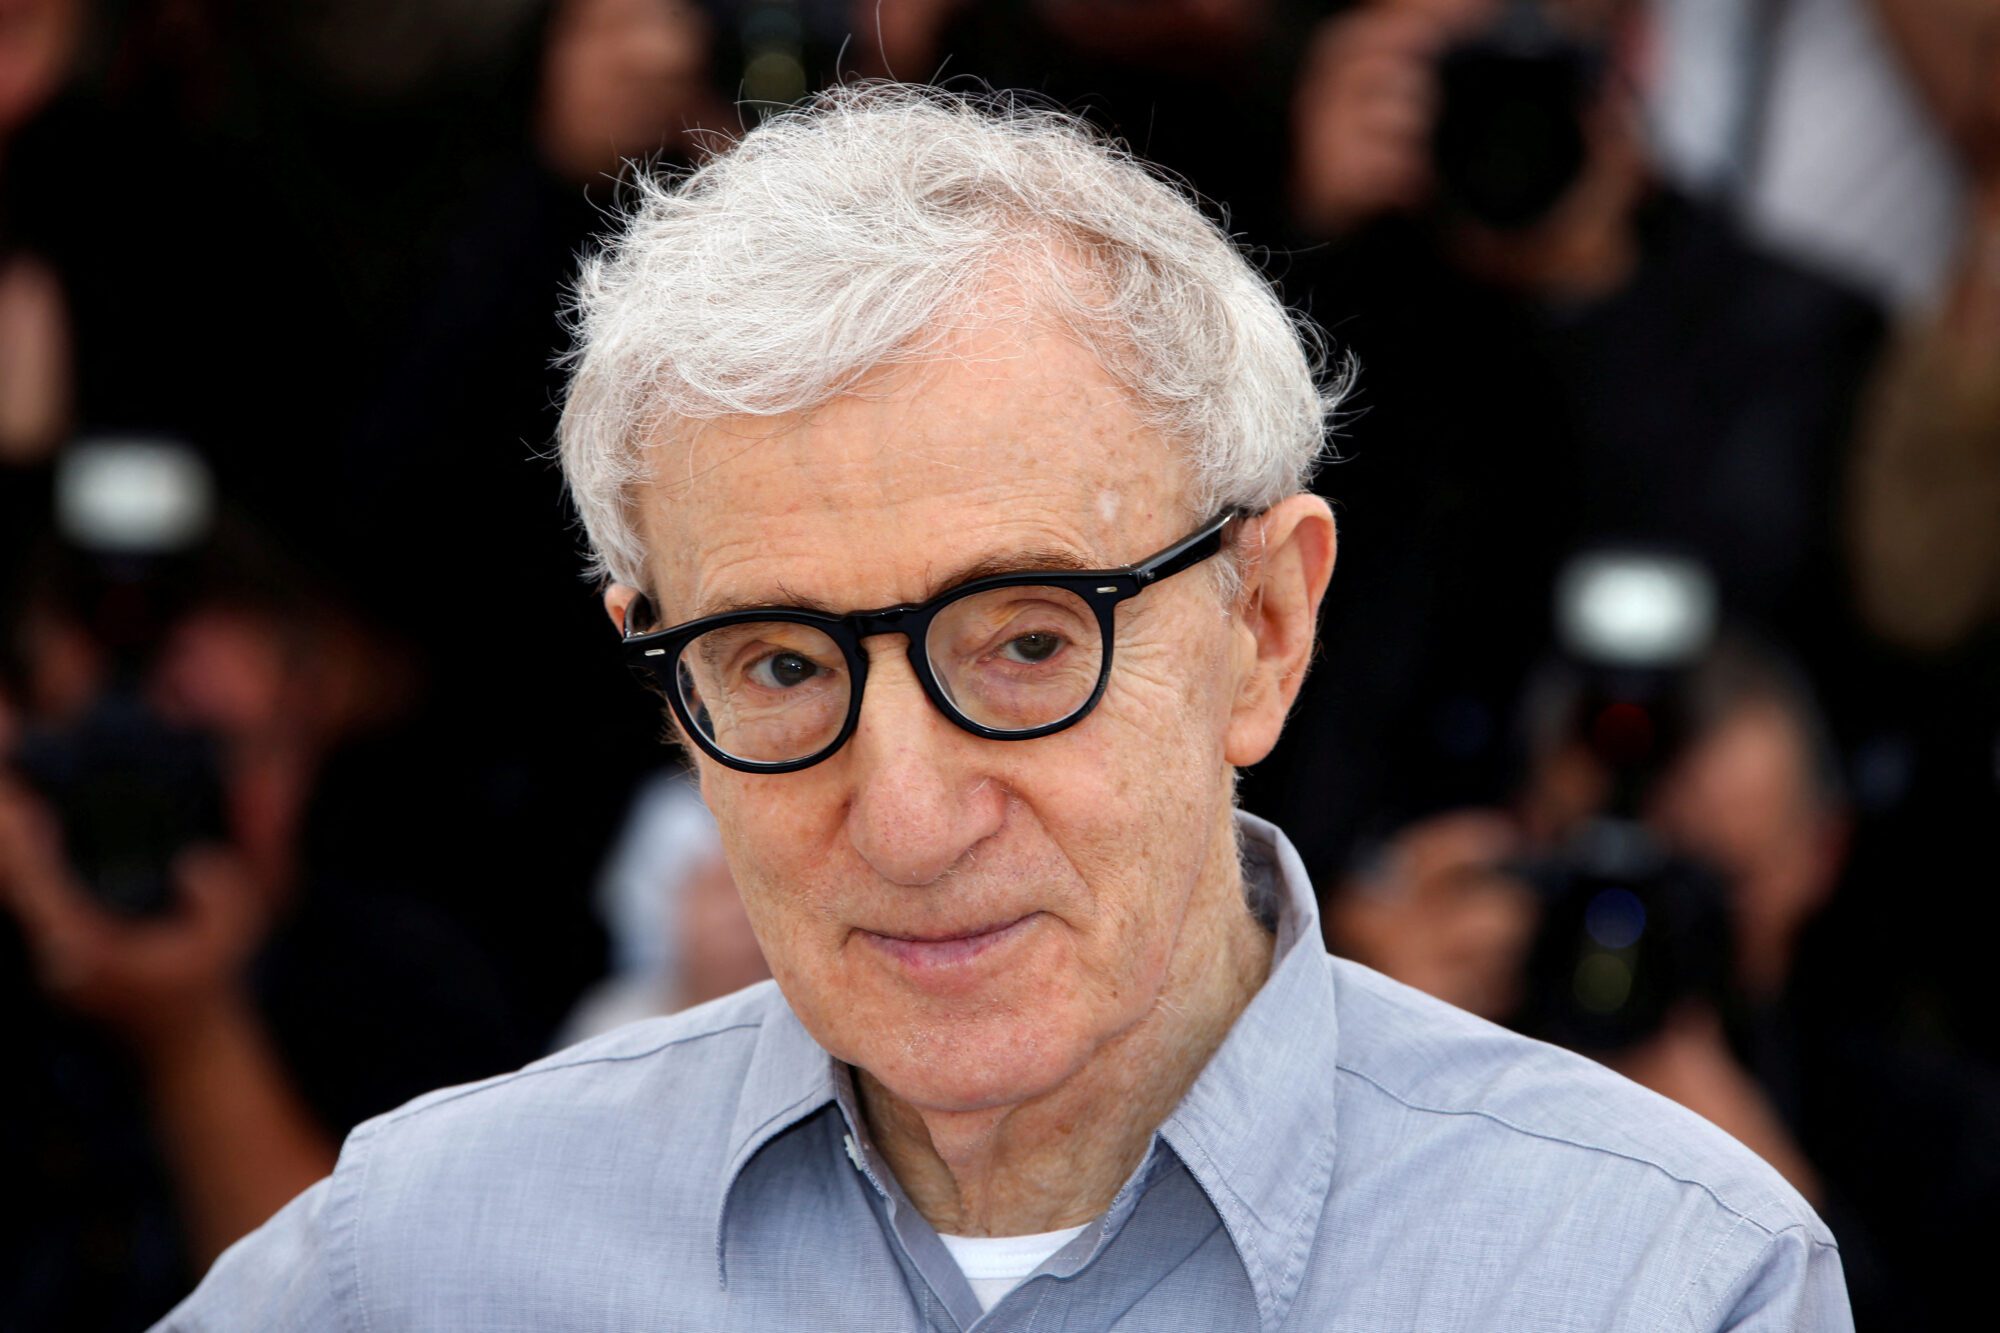 Director Woody Allen poses during a photocall for the film "Cafe Society" before the opening of the 69th Cannes Film Festival in Cannes, France, May 11, 2016. REUTERS/Eric Gaillard